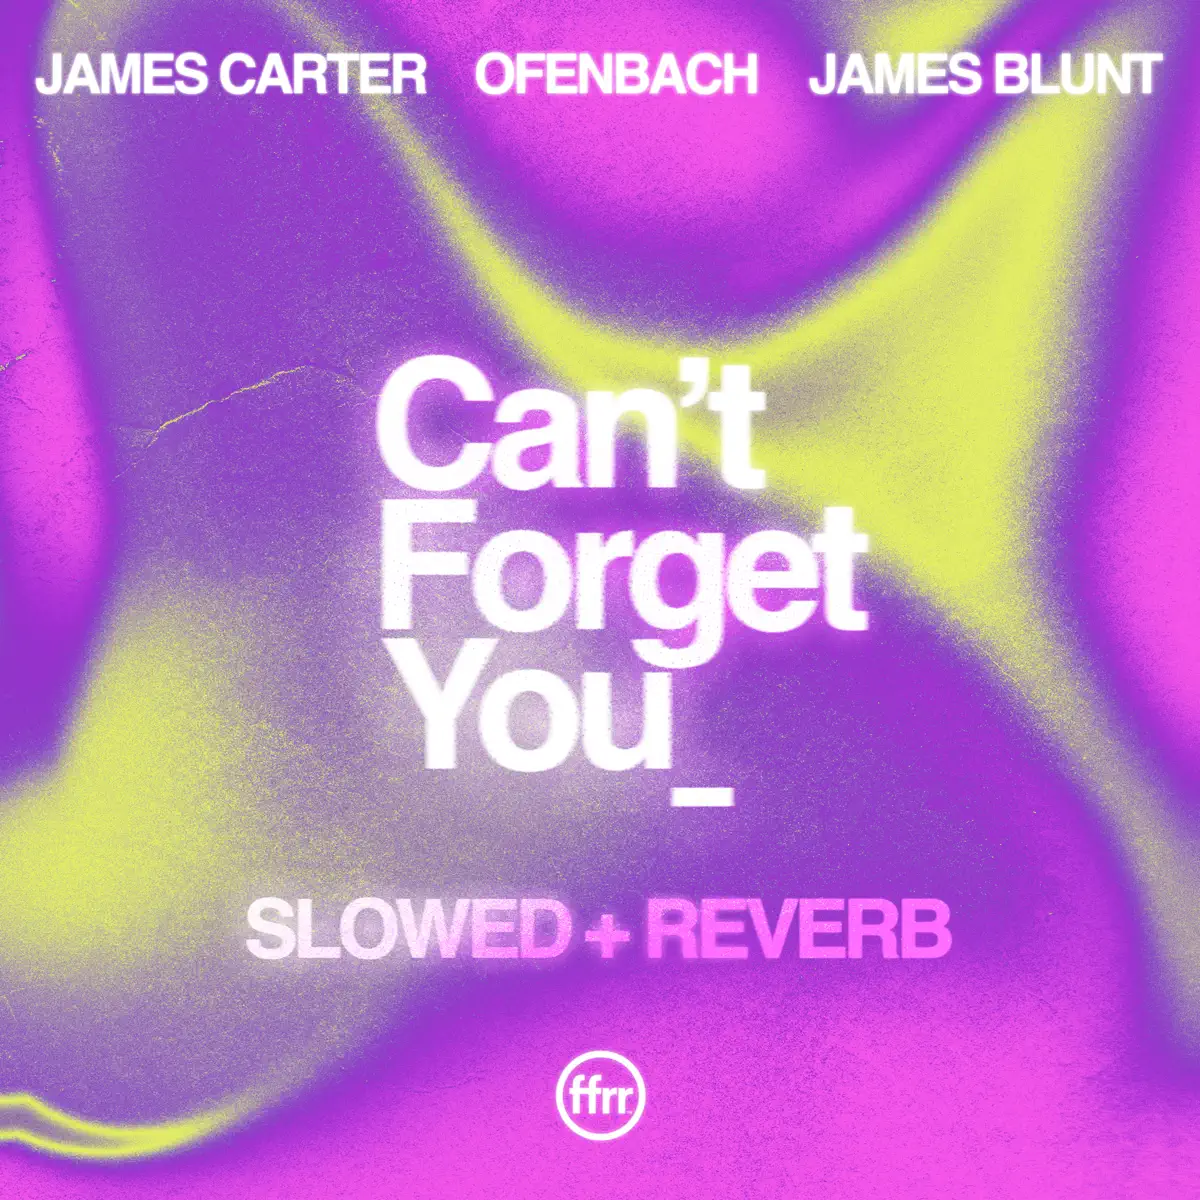 James Carter & Ofenbach - Can』t Forget You (feat. James Blunt) [slowed + reverb] - Single (2023) [iTunes Plus AAC M4A]-新房子